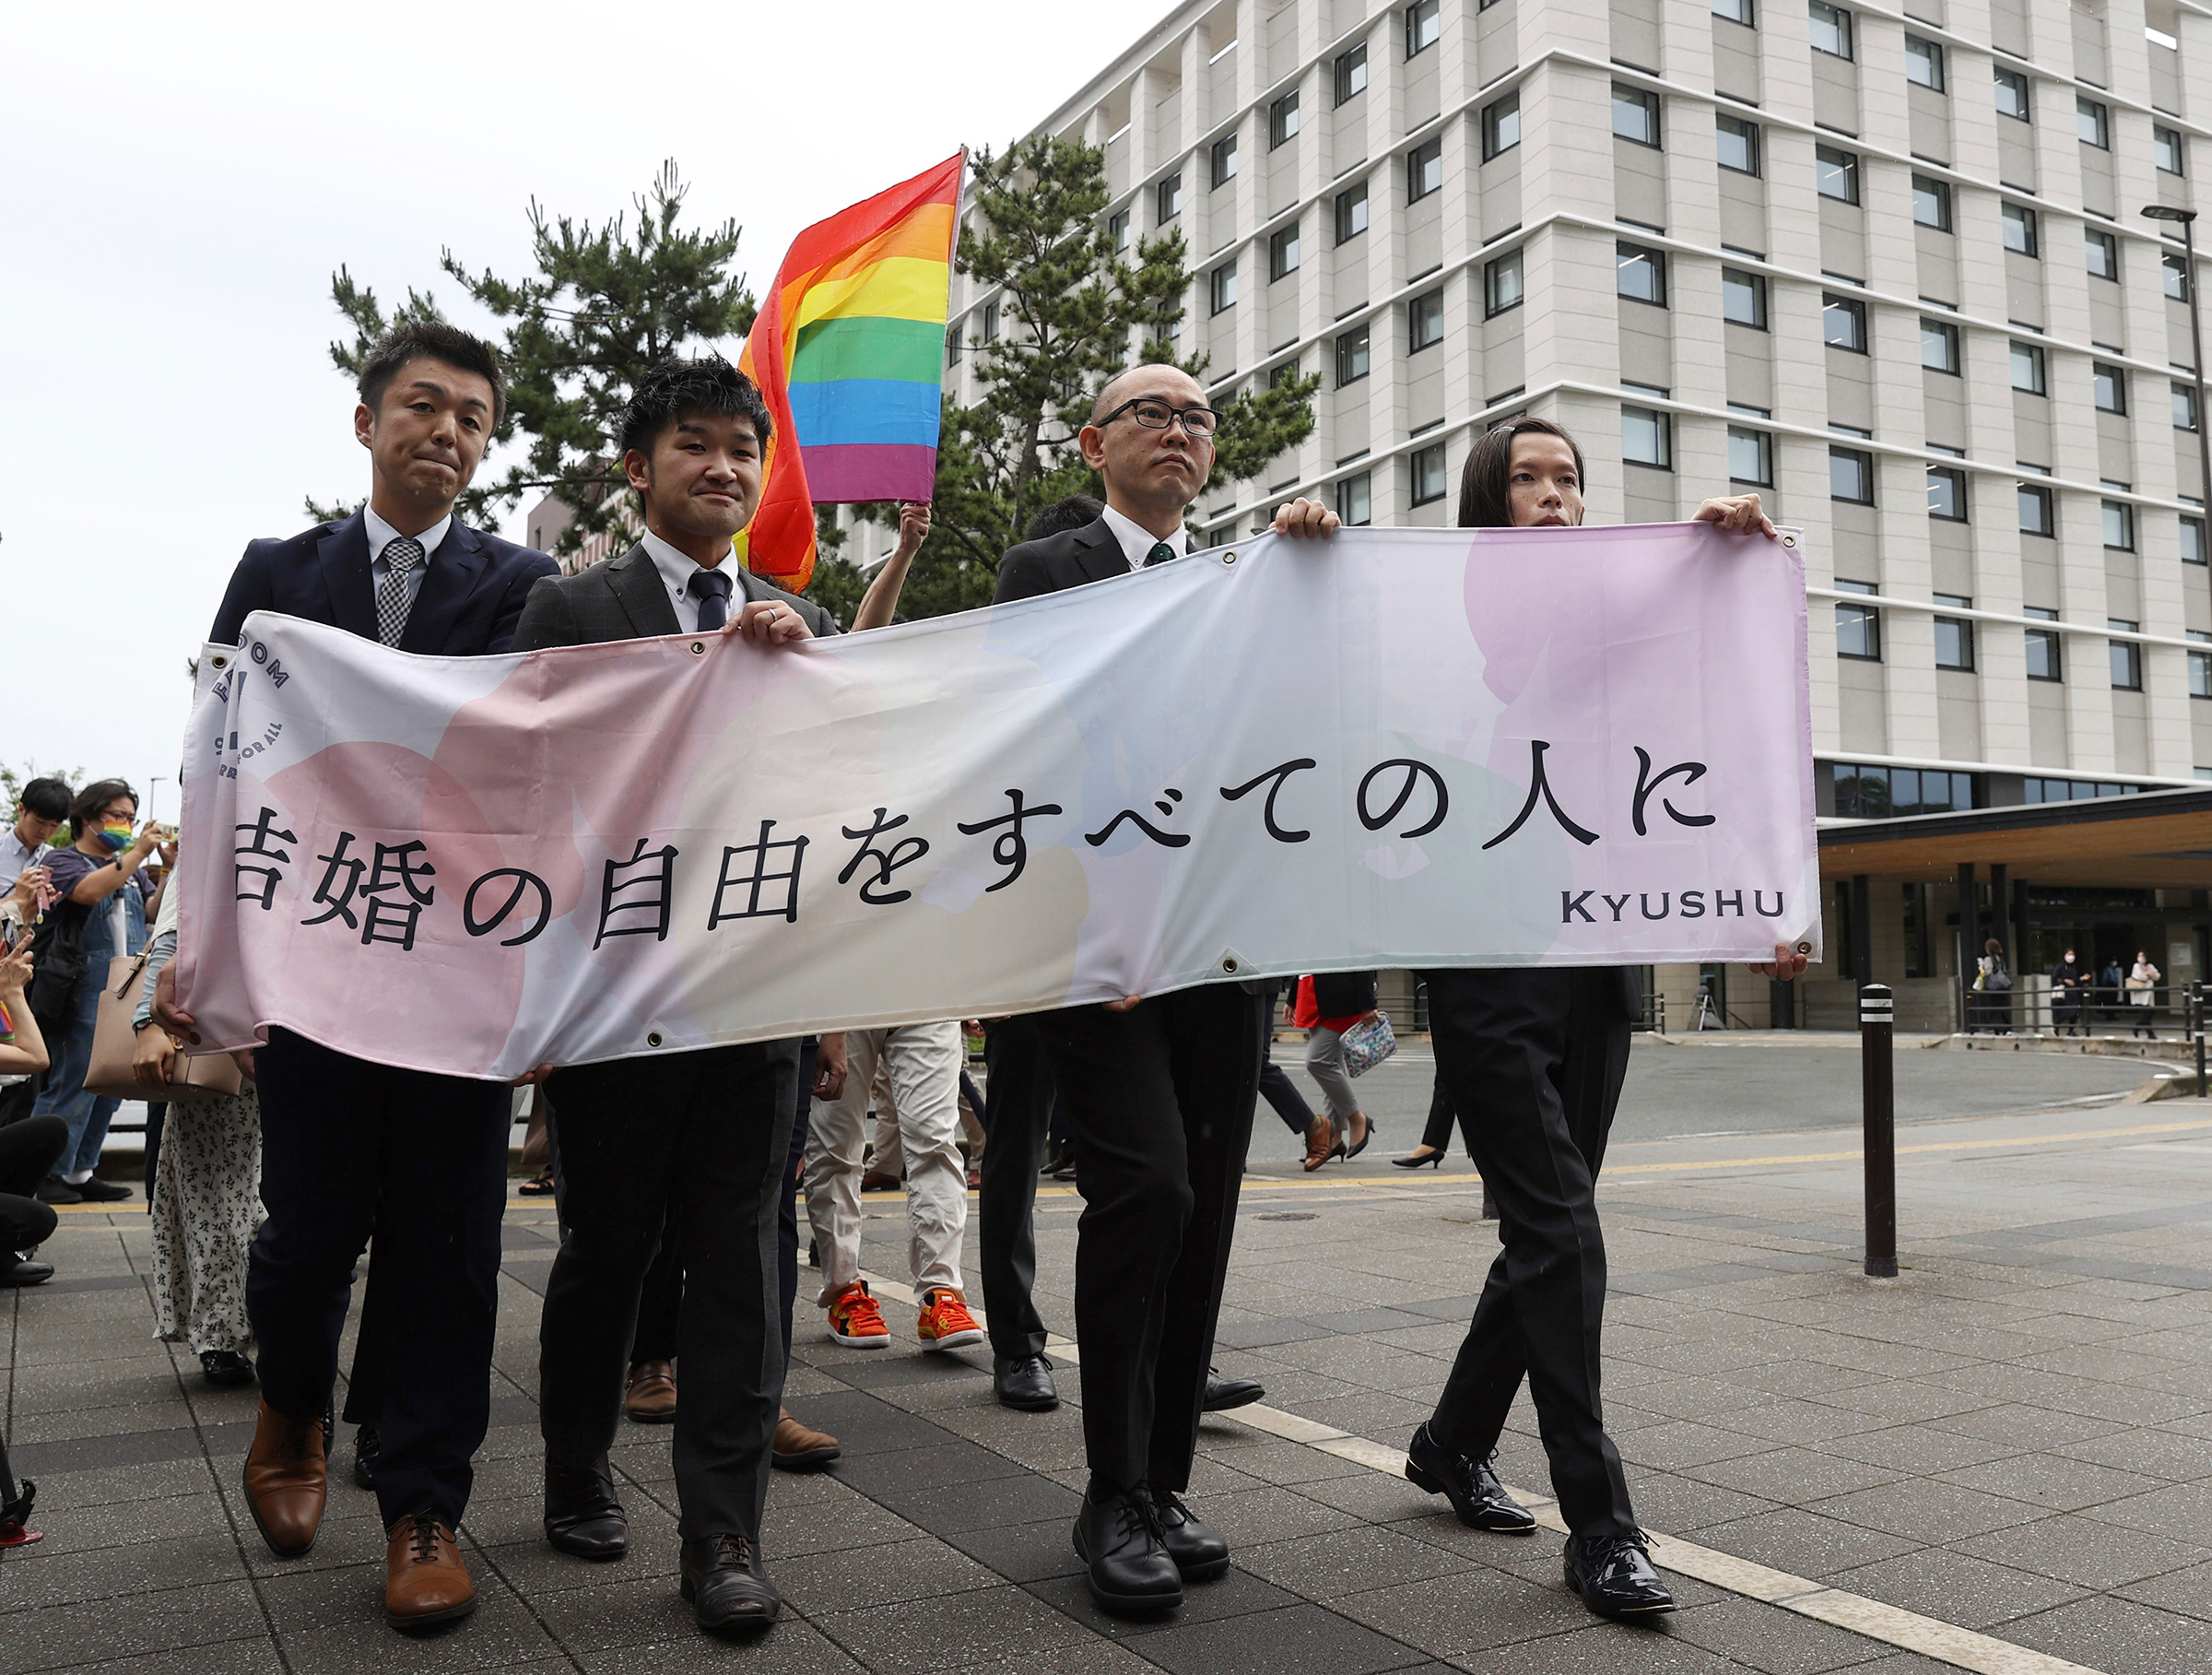 Japanese Family Forced Hardcore Videos - Japan Court Rules Same-Sex Marriage Ban In 'State of Unconstitutionality' |  Time